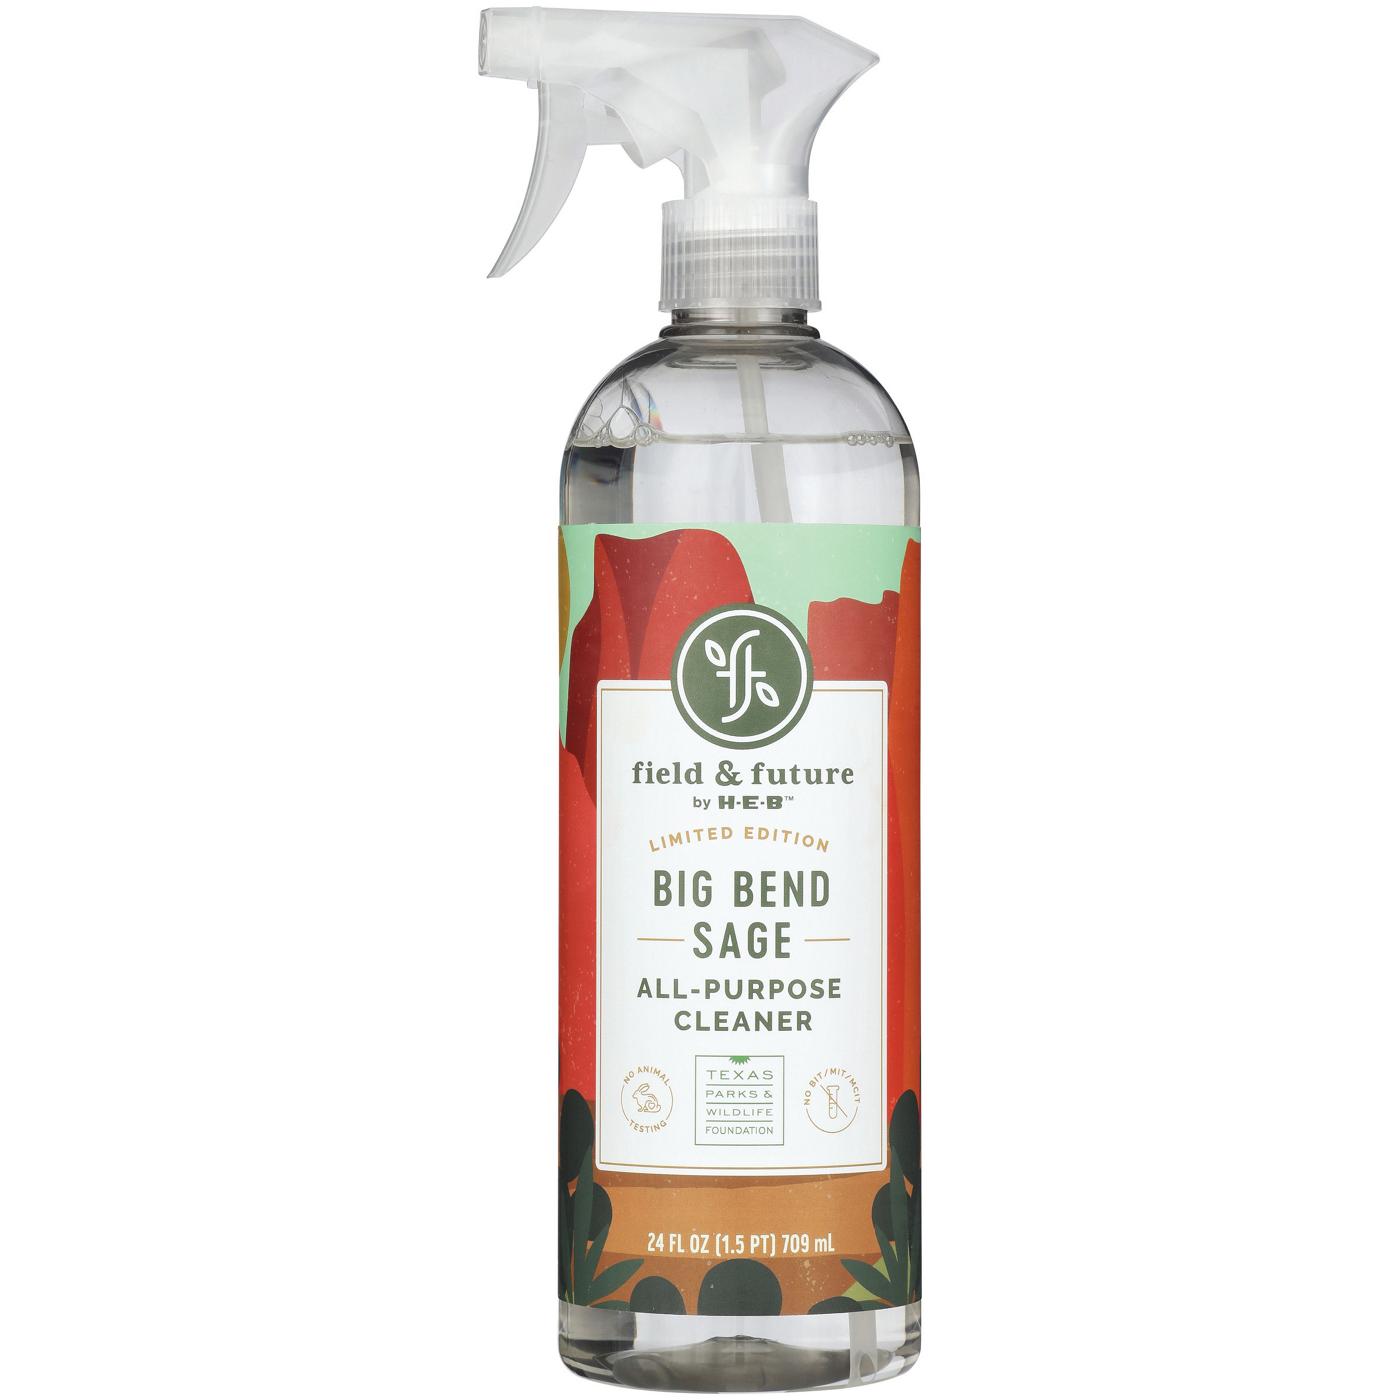 Field & Future by H-E-B All-Purpose Cleaner - Big Bend Sage; image 1 of 4